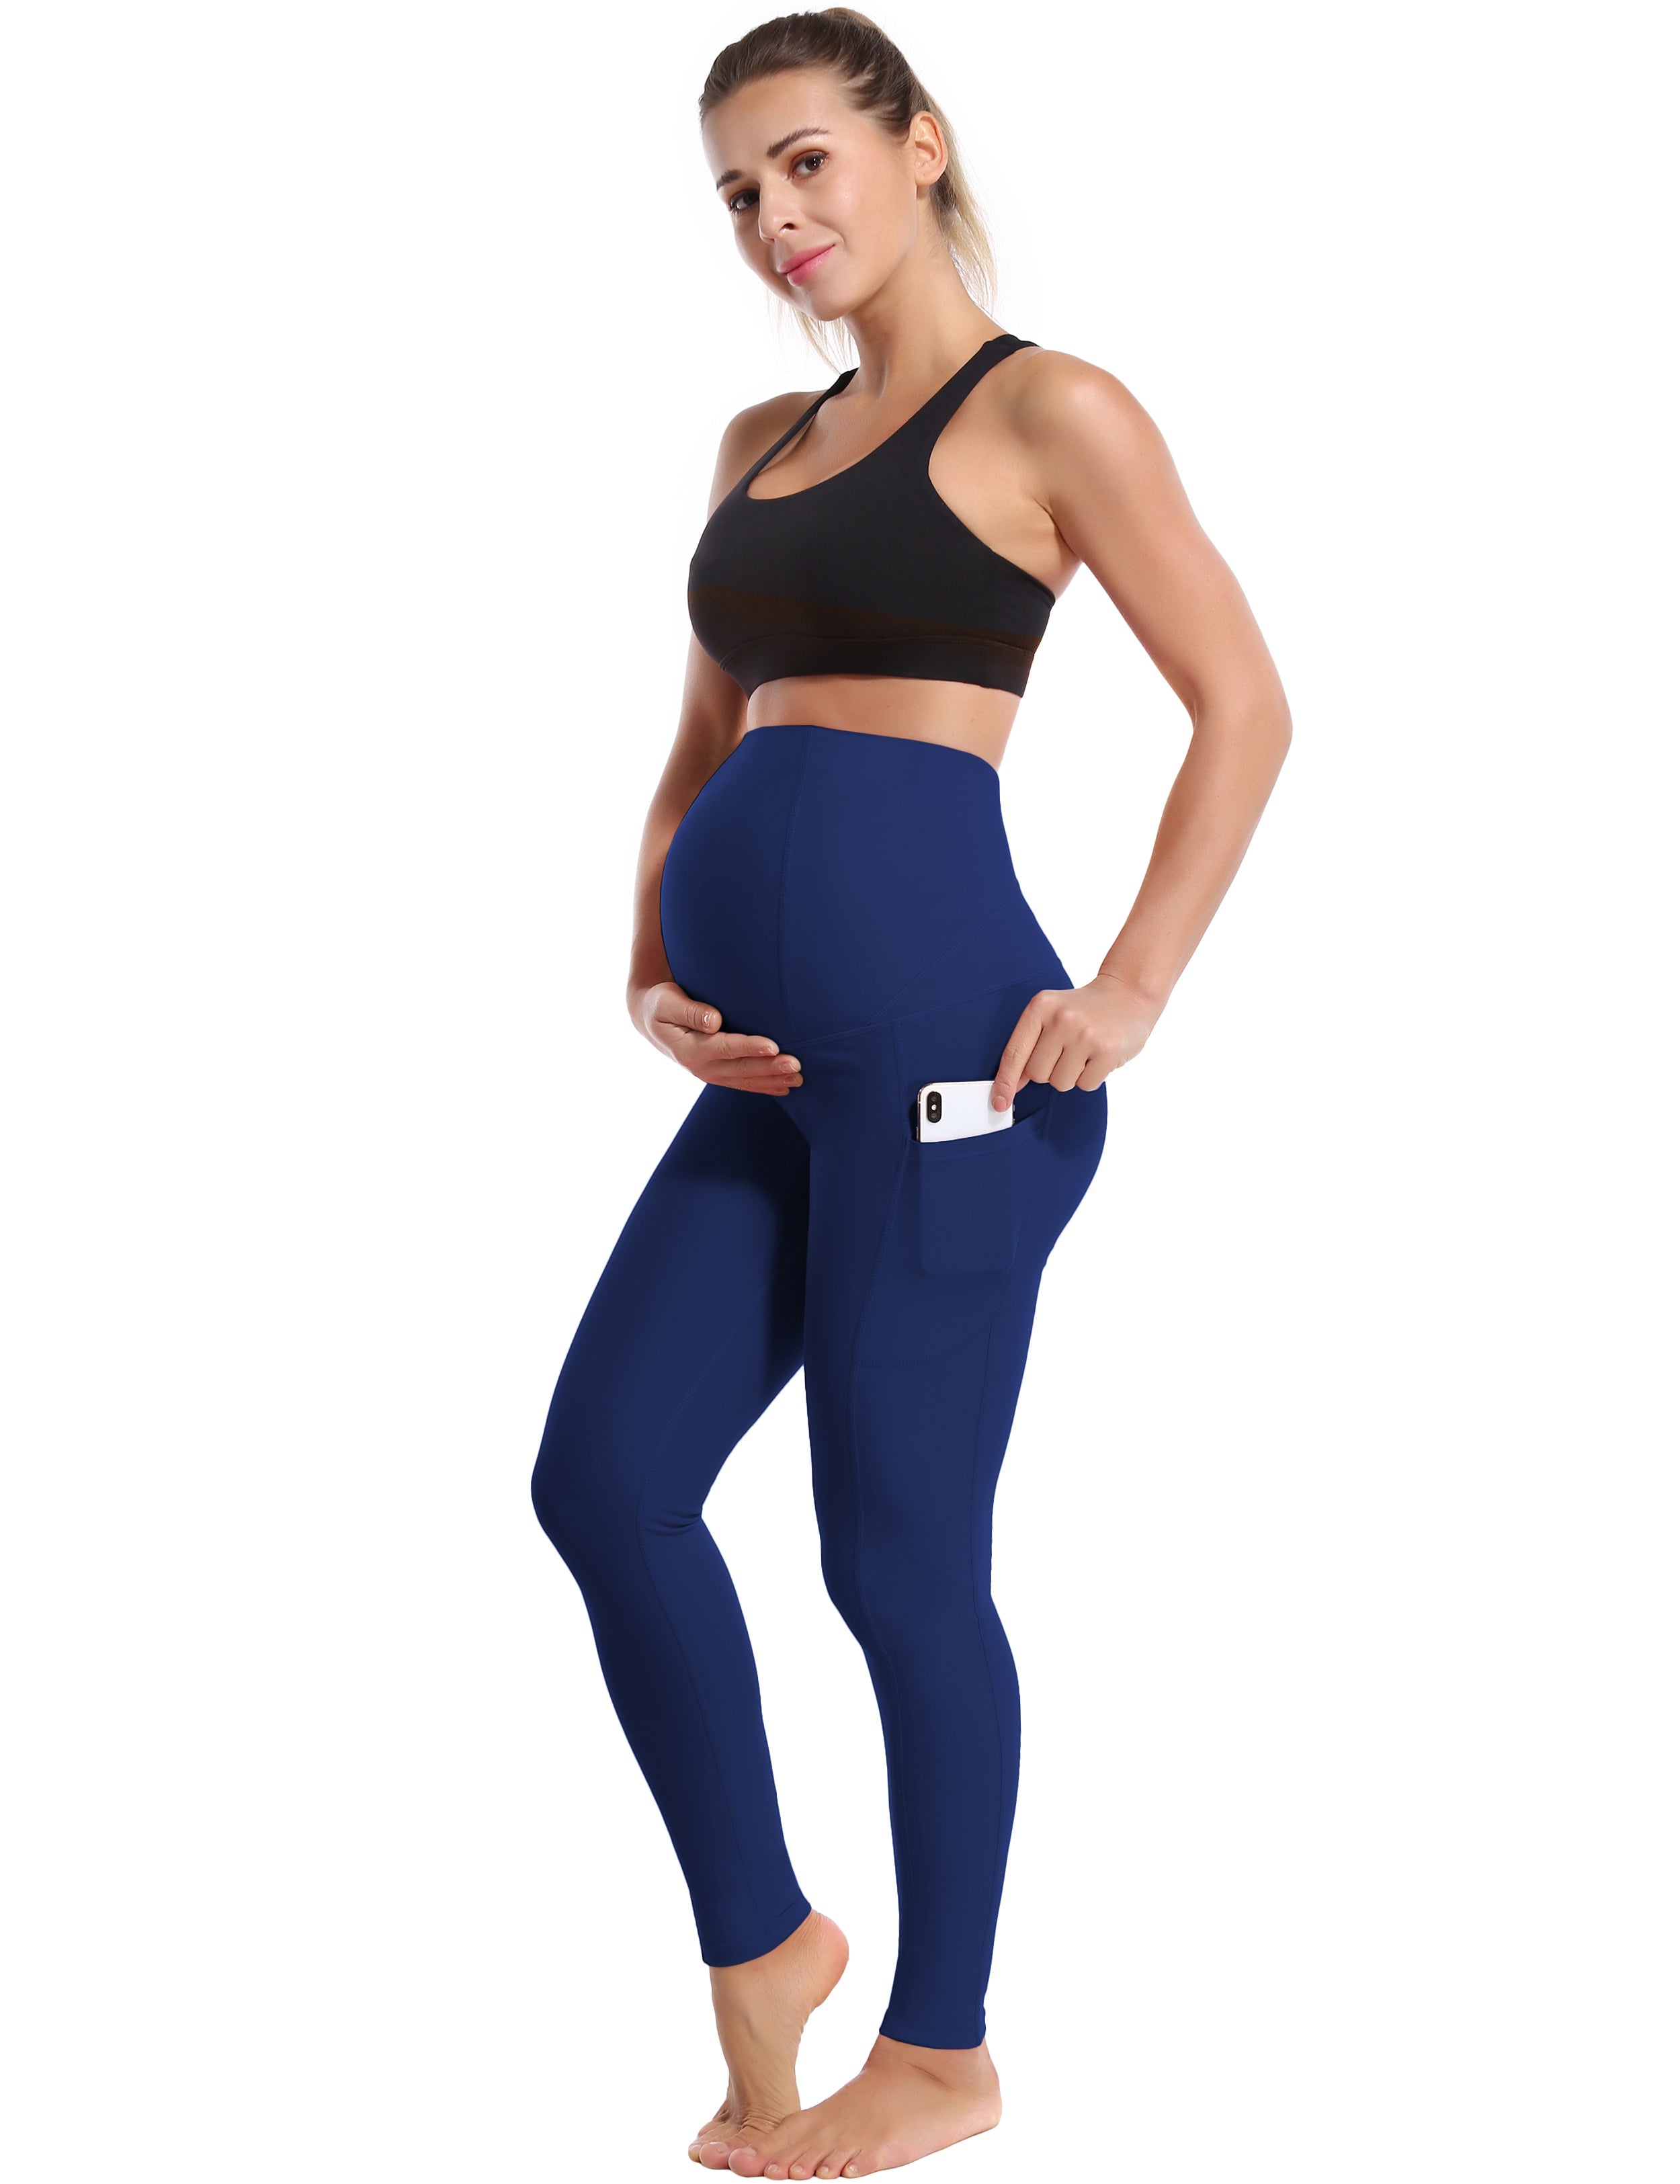 26" Side Pockets Maternity Golf Pants navy 87%Nylon/13%Spandex Softest-ever fabric High elasticity 4-way stretch Fabric doesn't attract lint easily No see-through Moisture-wicking Machine wash